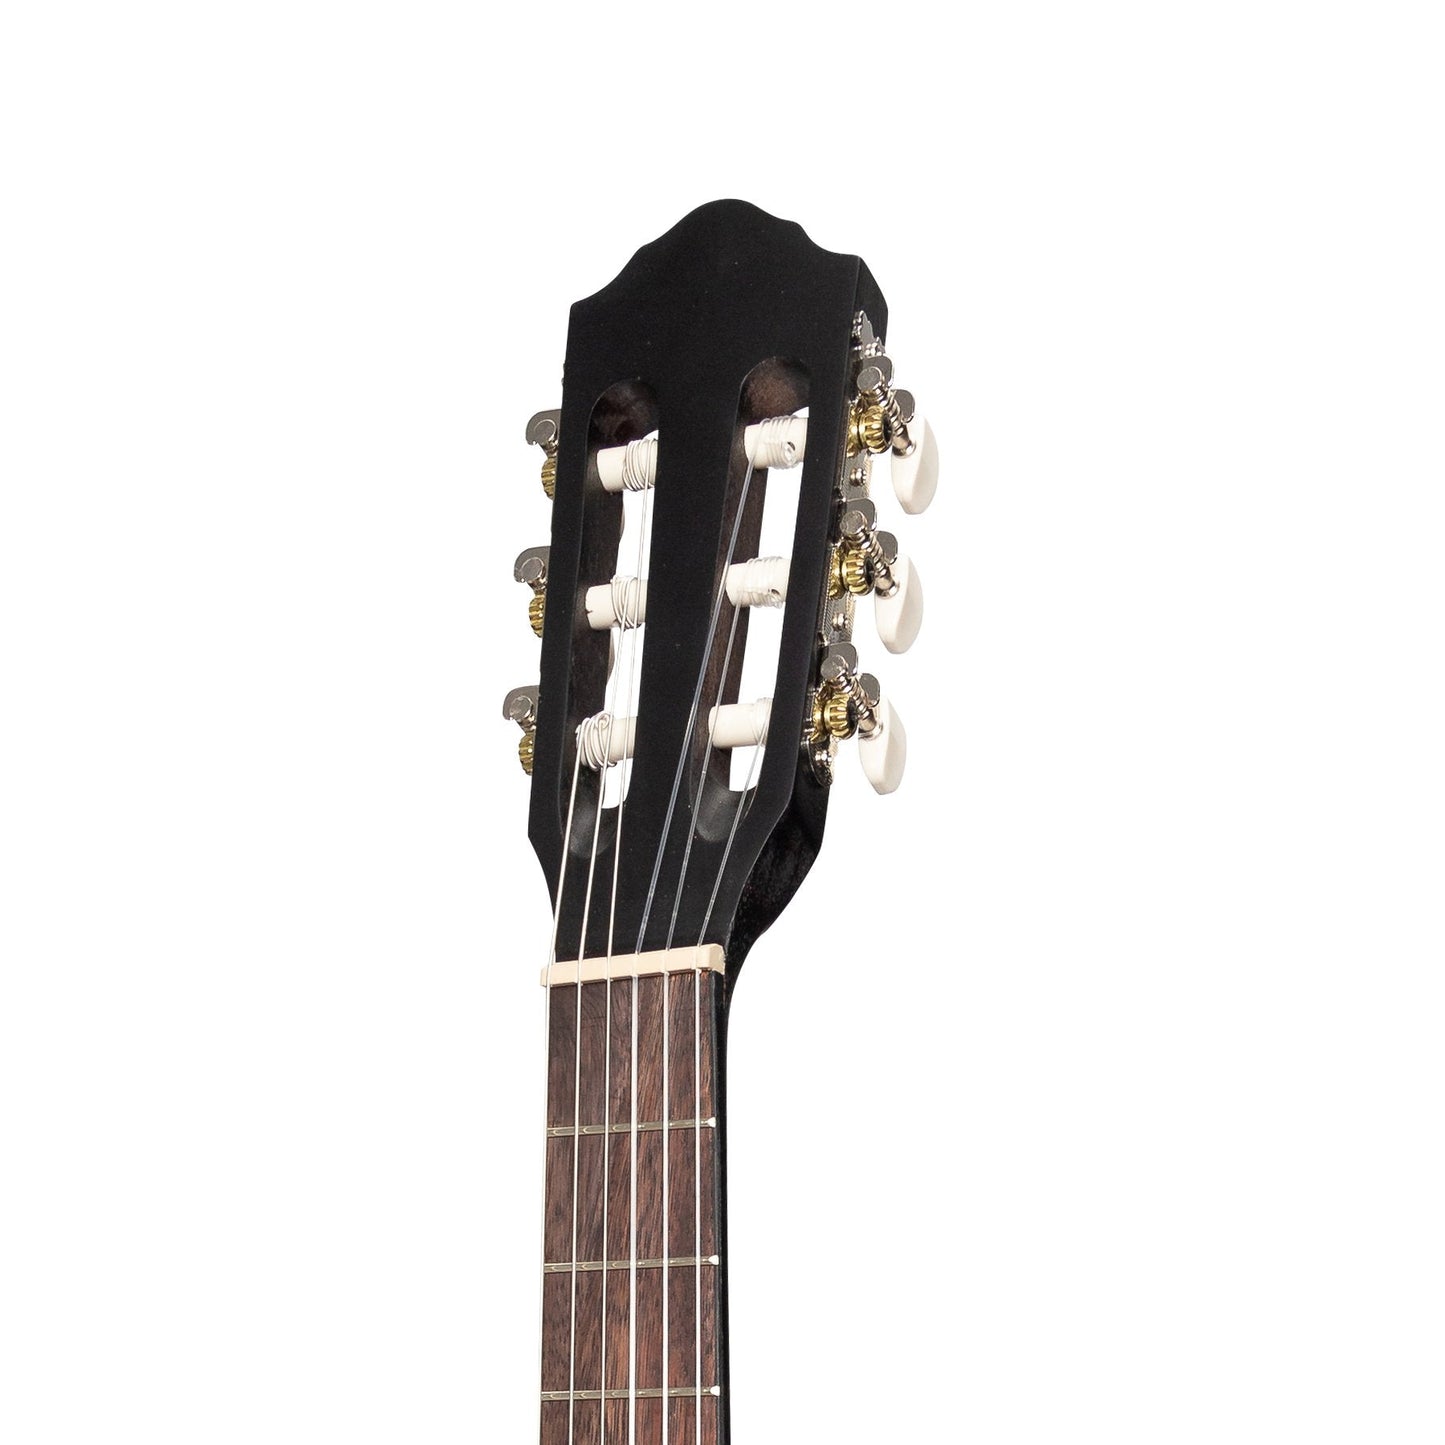 Martinez 'Slim Jim' 3/4 Size Student Classical Guitar Pack with Built In Tuner (Black)